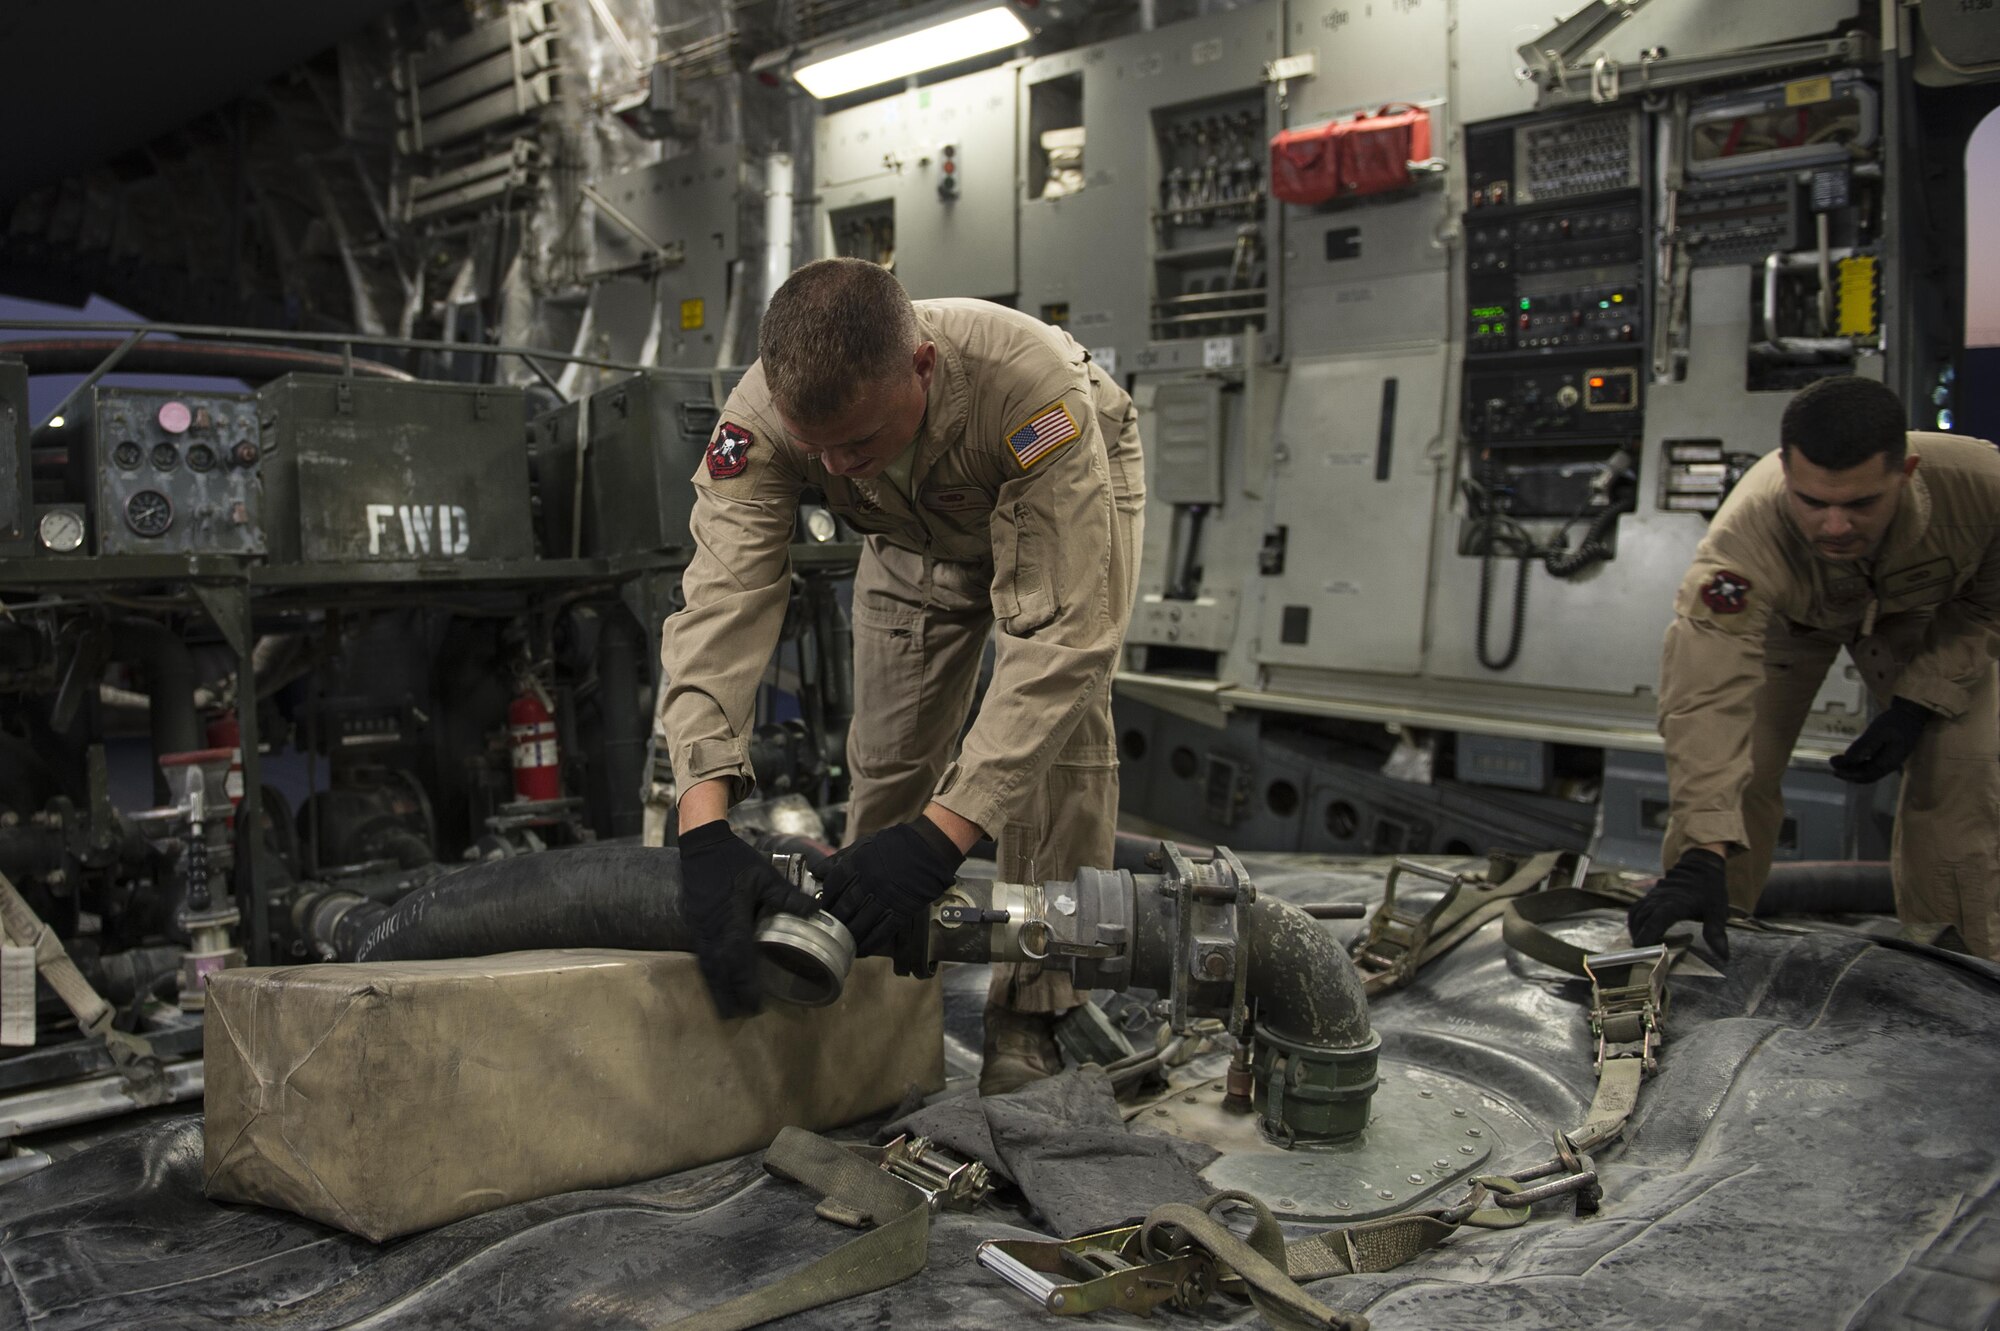 U.S. Air Force Senior Airmen Dalton Lobato, right, and Benjamin Hunter, 379th Expeditionary Logistics Readiness Squadron aerial bulk fuels delivery system team members, fill fuel bladders for transport to coalition bases in Iraq in support of Operation Inherent Resolve, Dec. 16, 2015. OIR is the coalition intervention against the Islamic State of Iraq and the Levant. (U.S. Air Force photo by Tech. Sgt. Nathan Lipscomb)